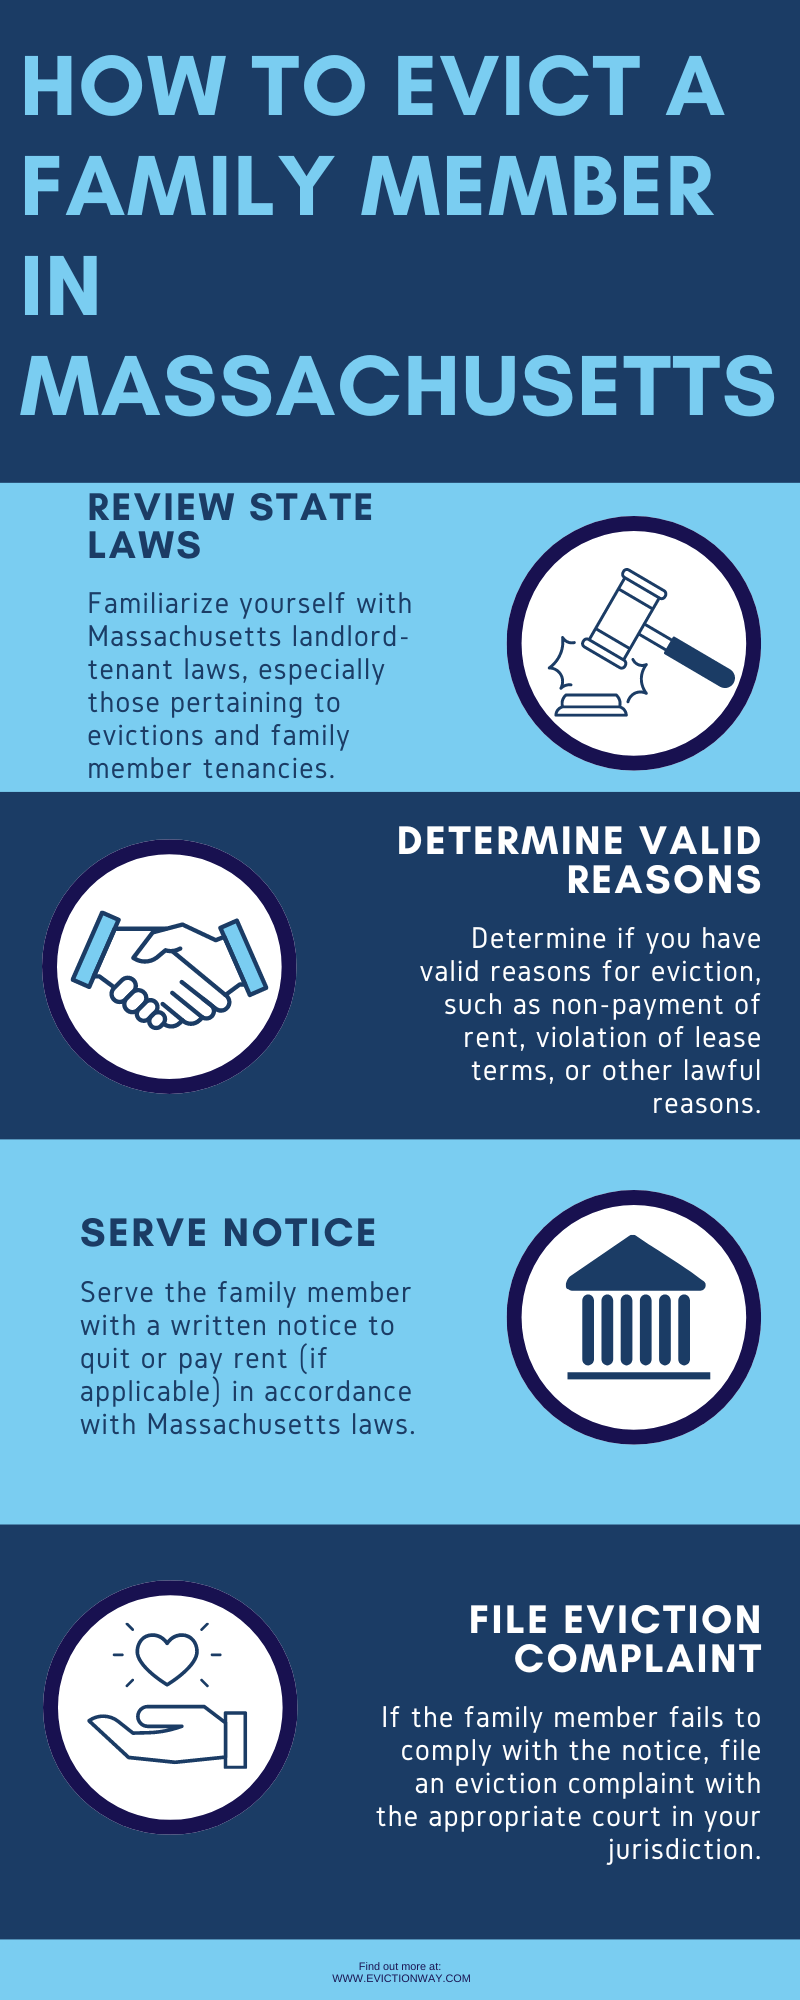 How to Evict a Family Member in Massachusetts